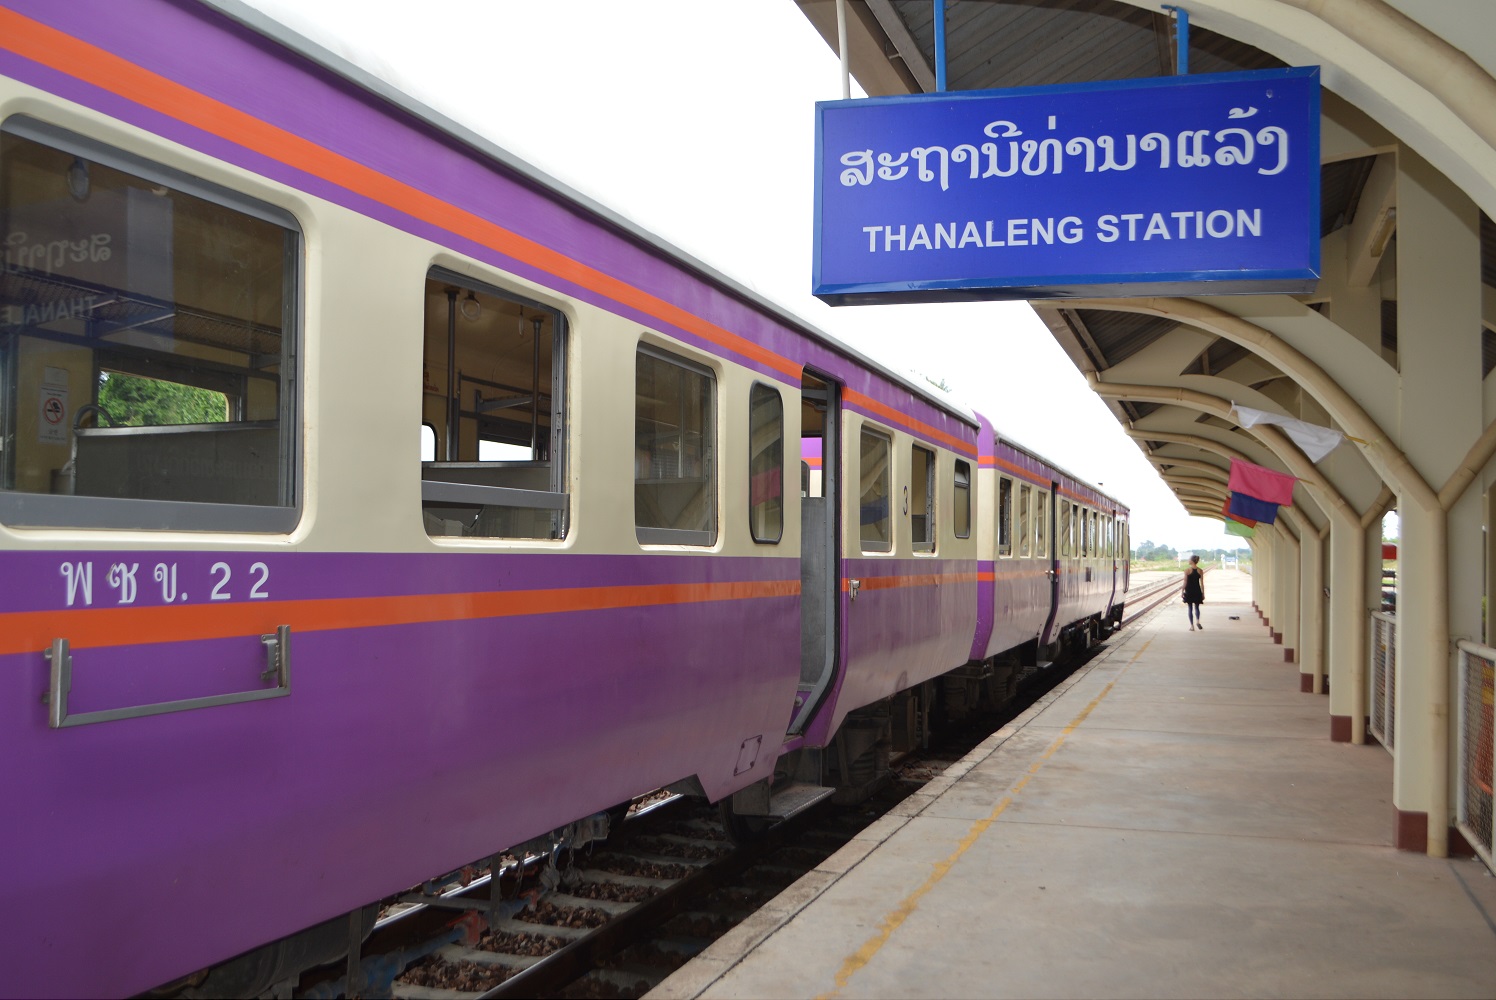 Travel to Laos by train